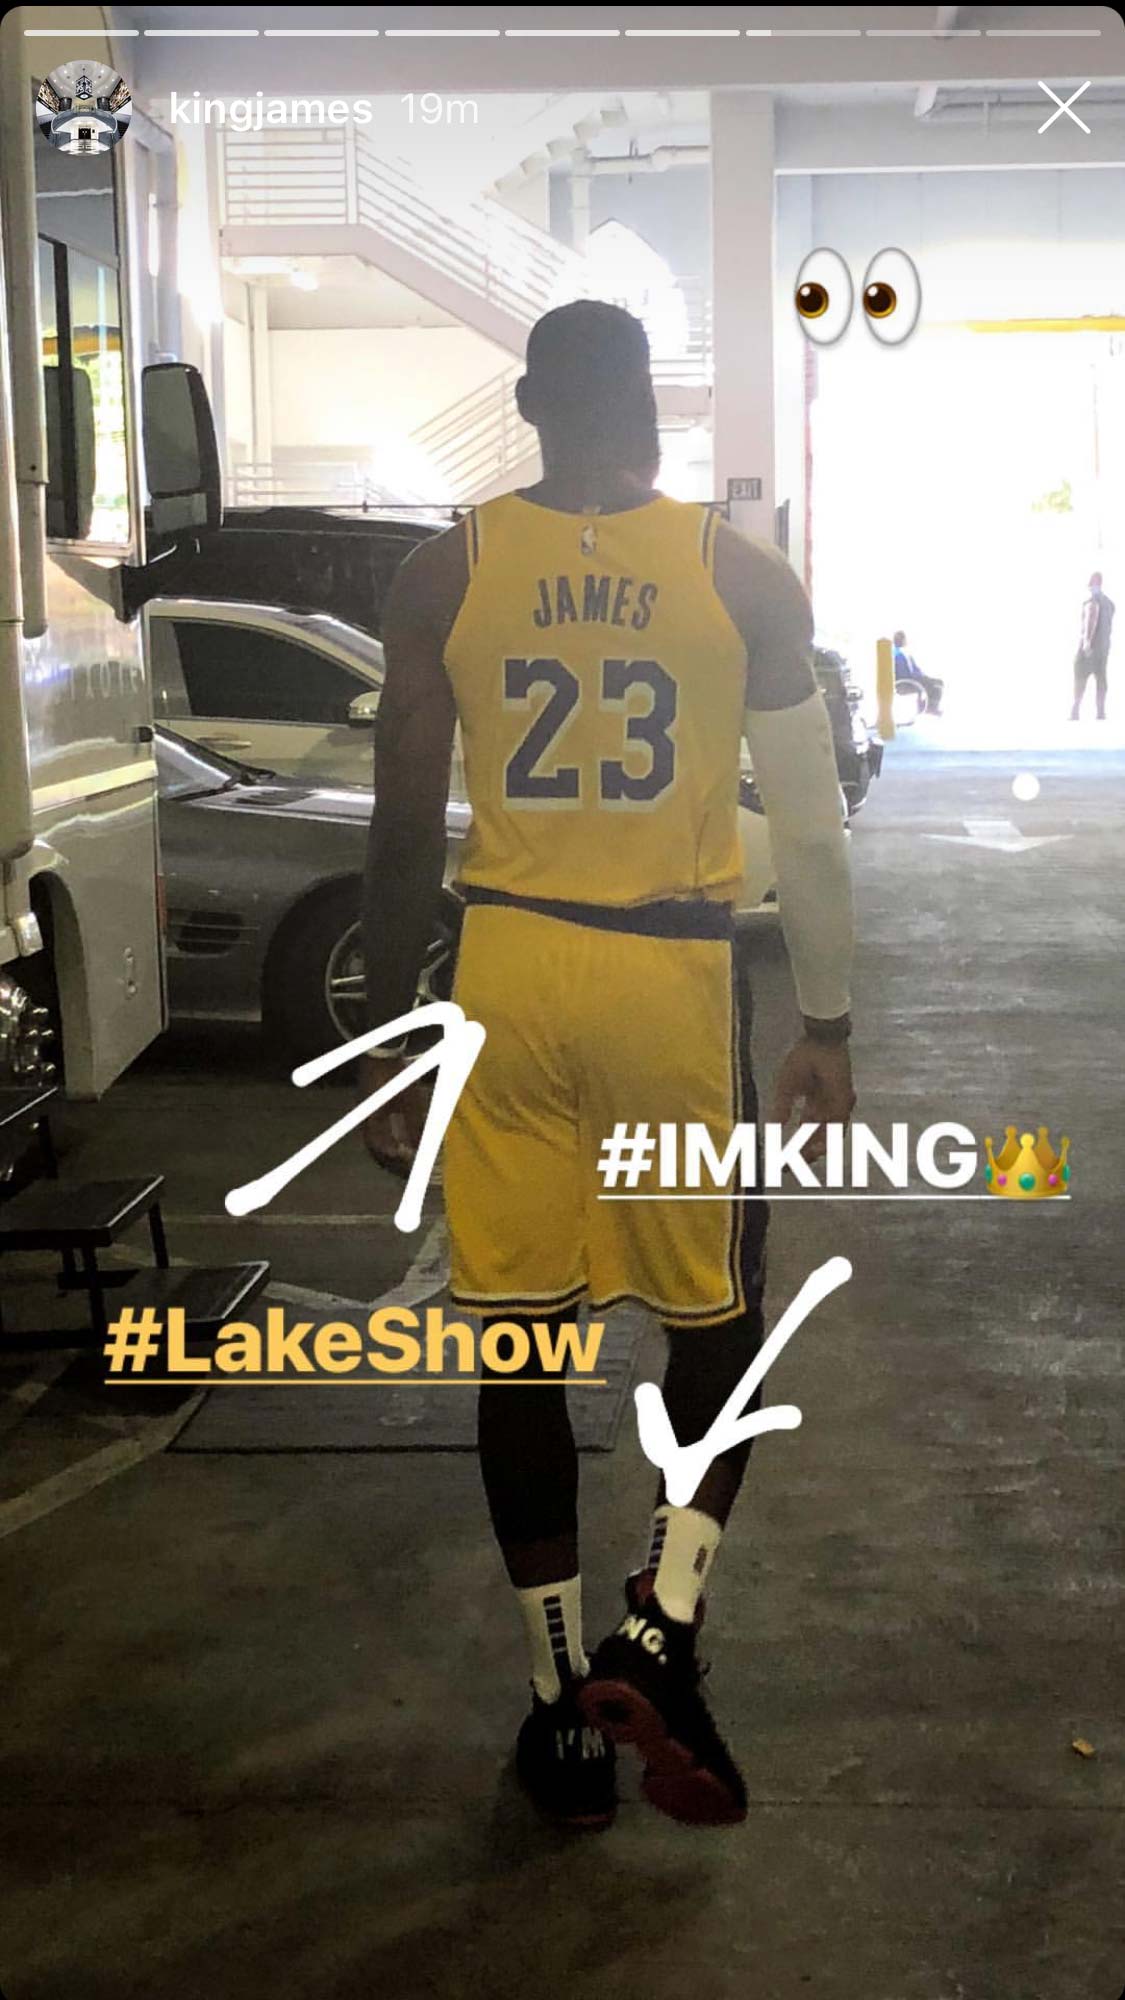 Is this a new Laker jersey? found it on Instagram Nike ad : r/lakers